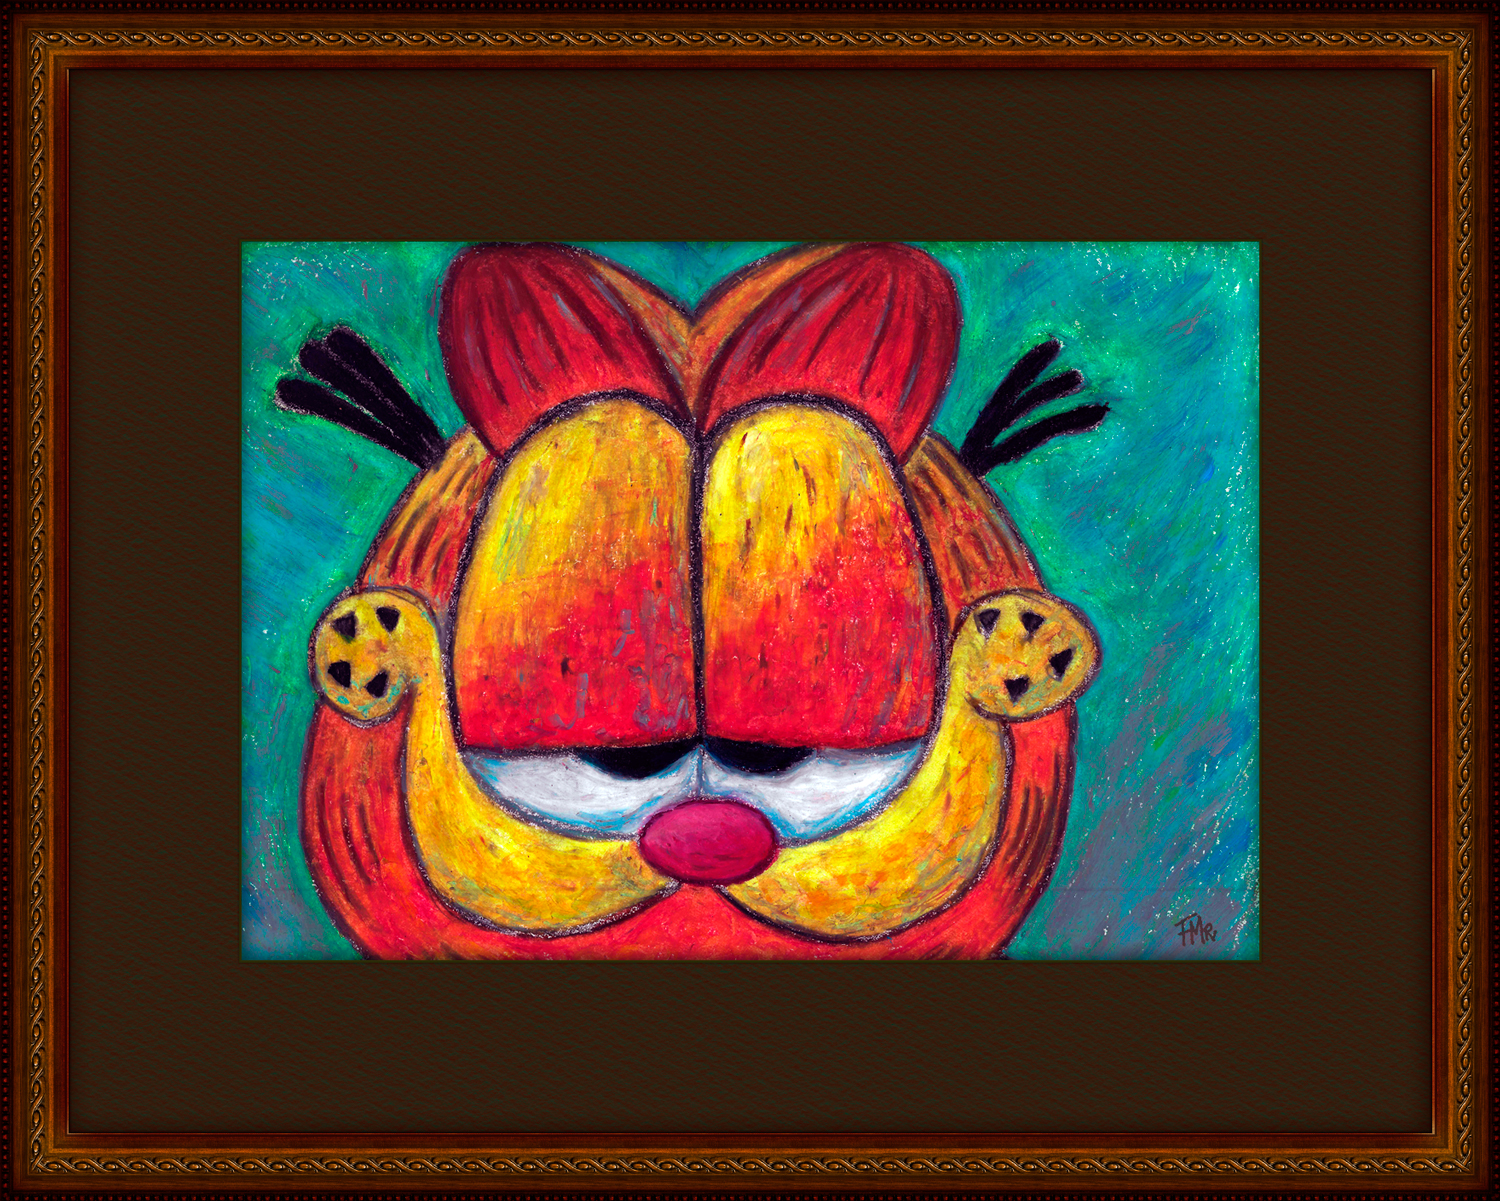 the Face of Garfield by Saltwater